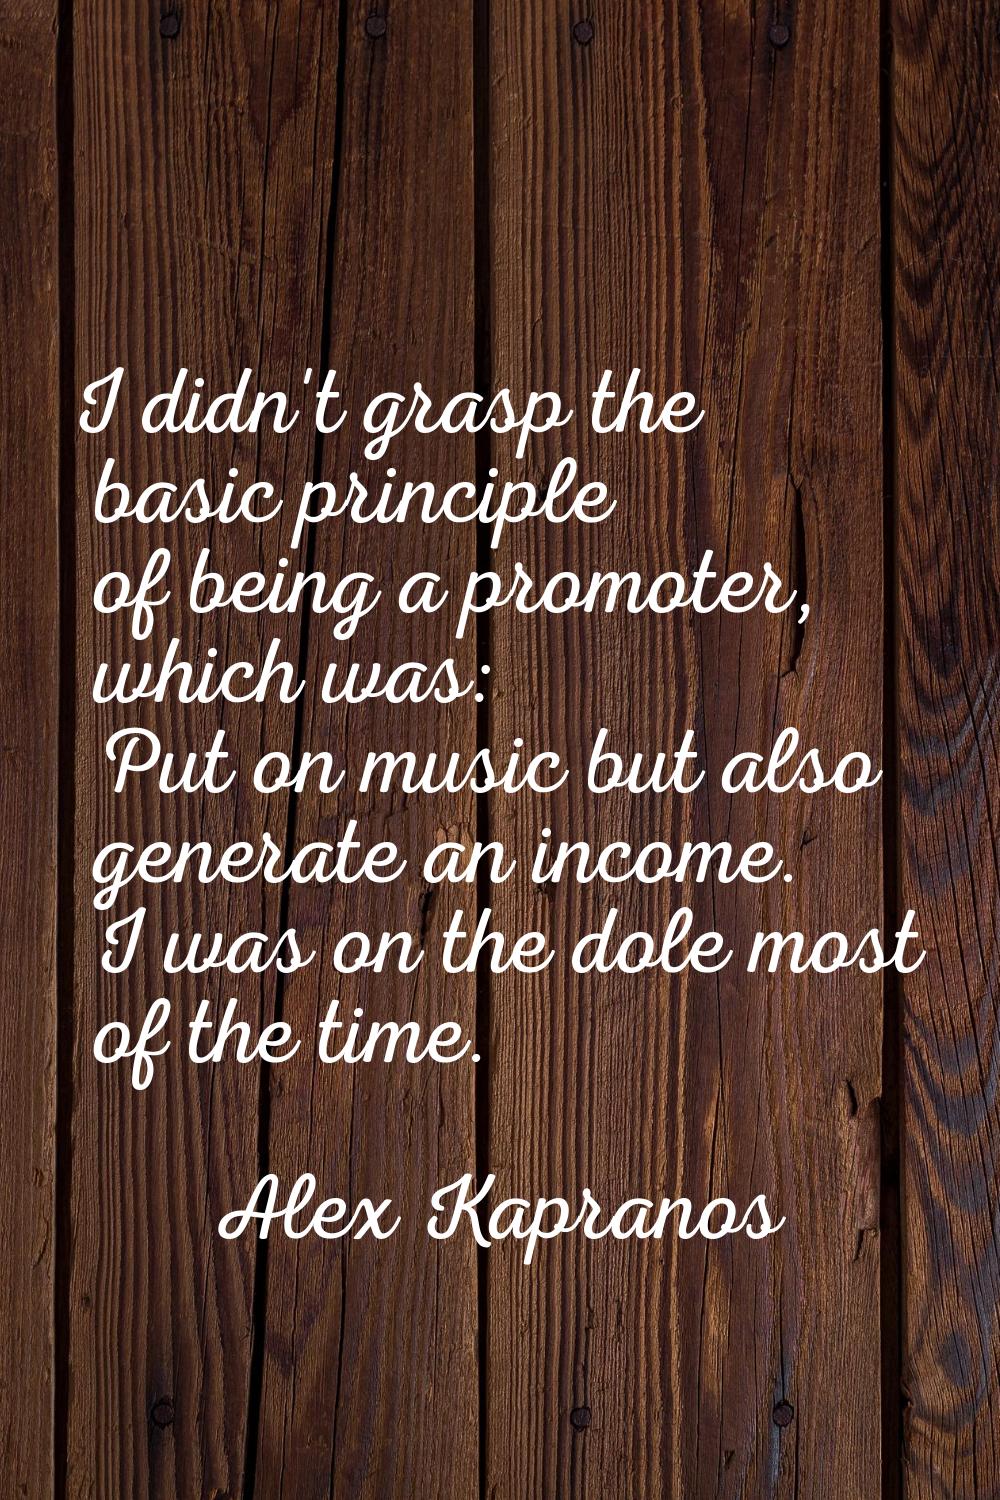 I didn't grasp the basic principle of being a promoter, which was: Put on music but also generate a